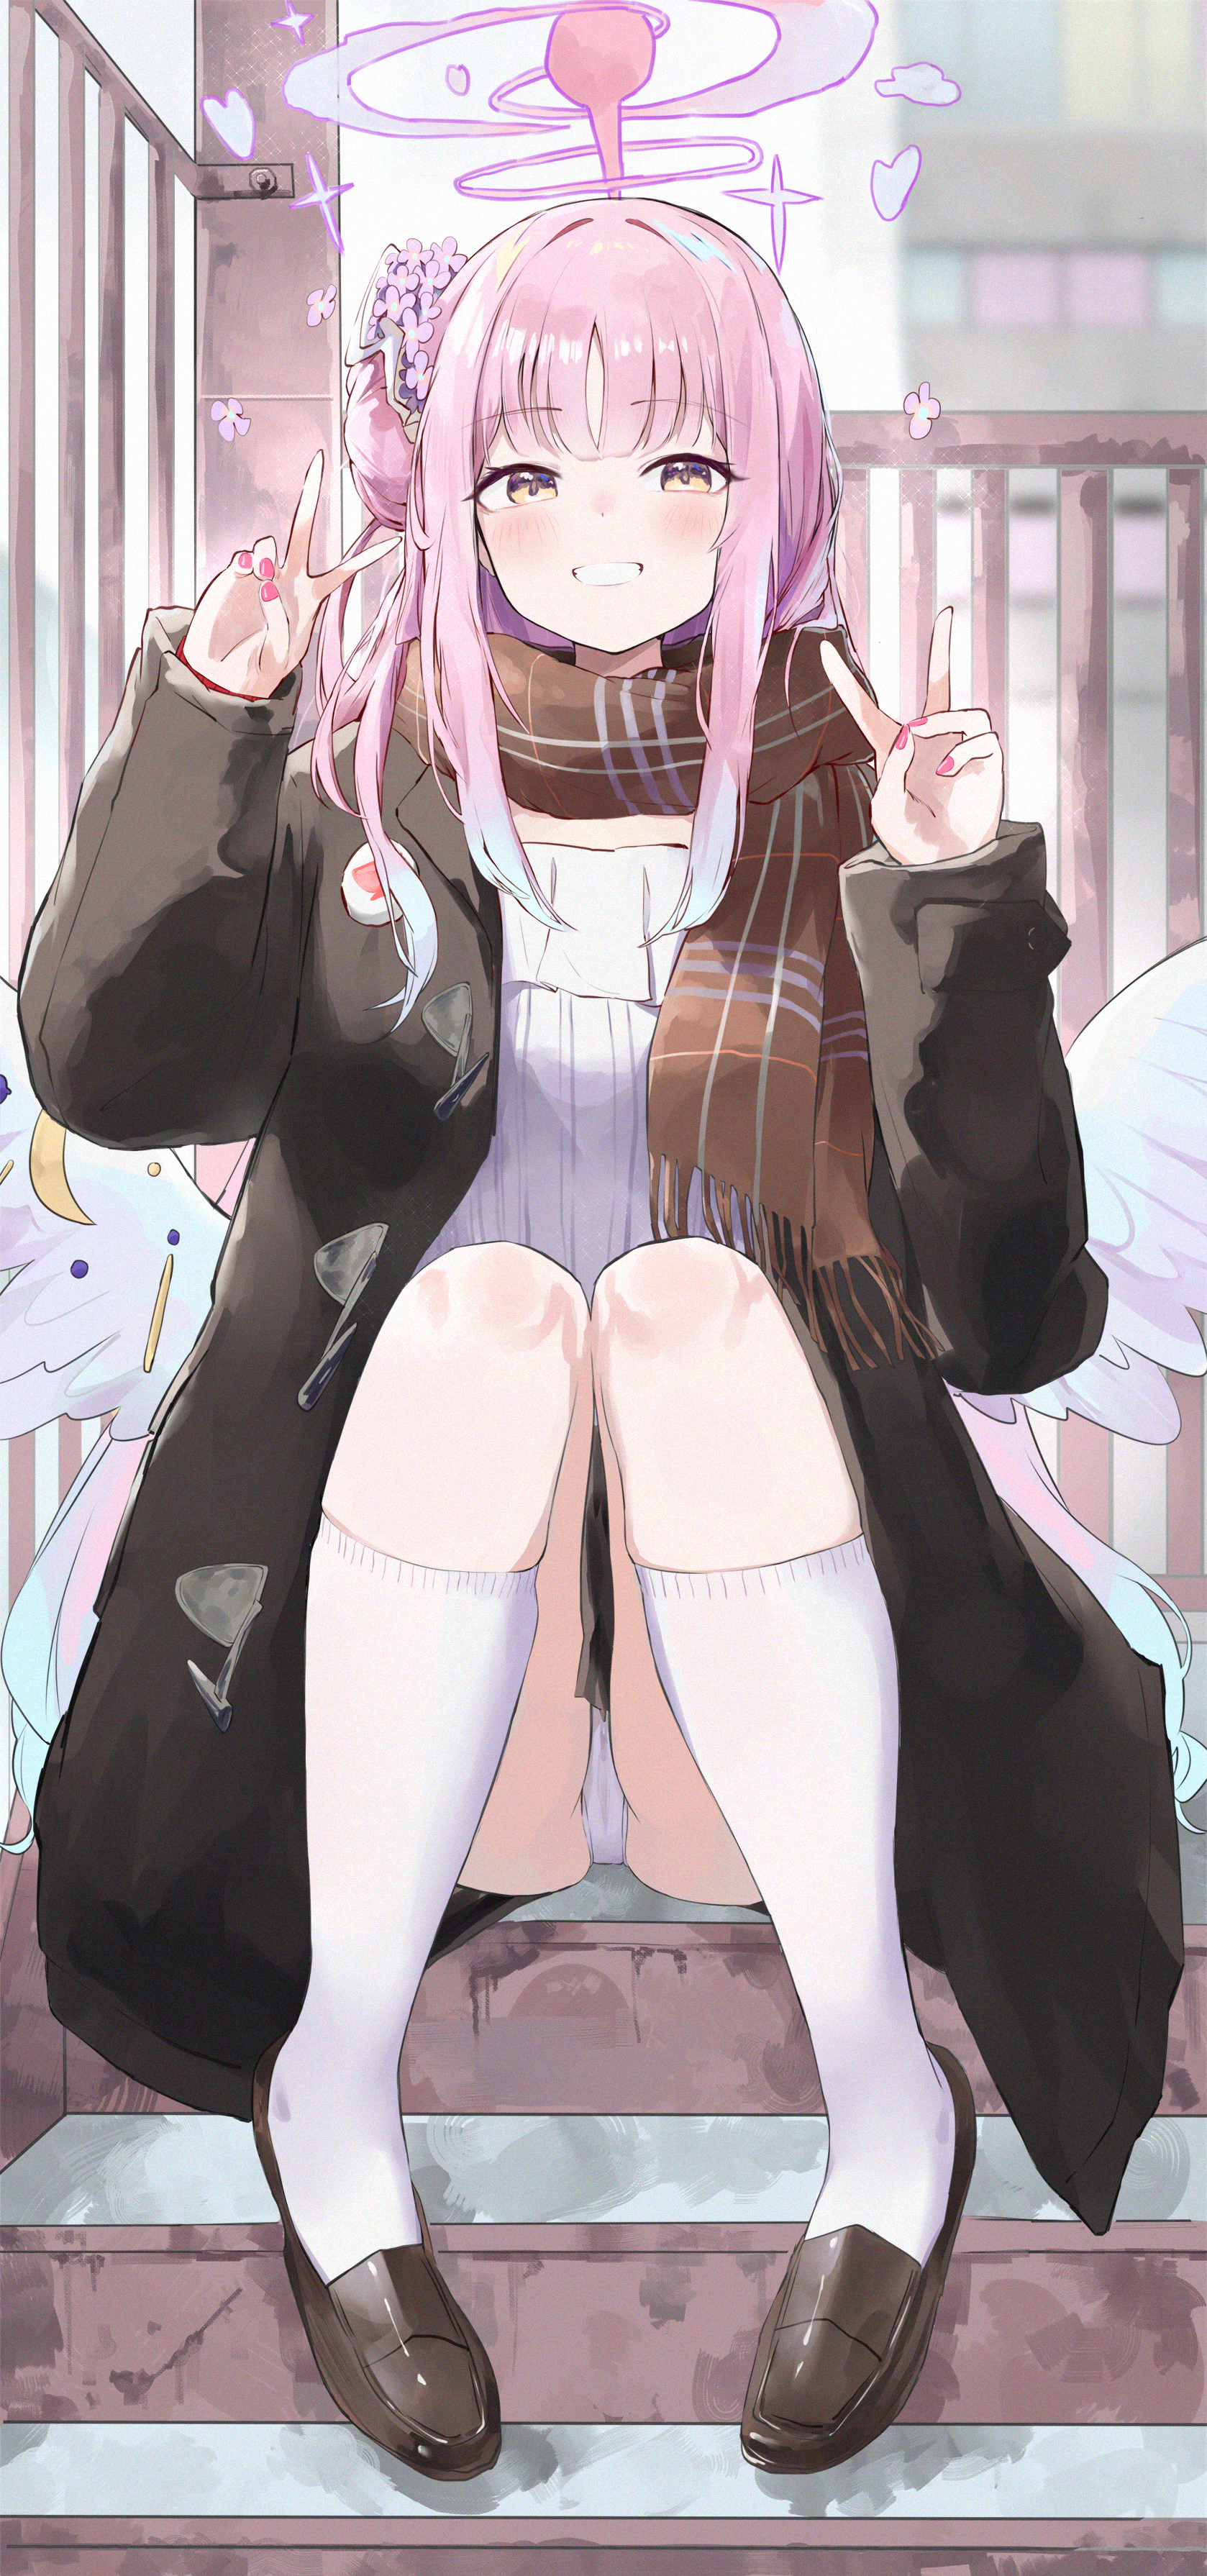 Anime 1678x3581 anime anime girls upskirt skirt smiling peace sign pink hair portrait display jsscj Blue Archive Misono Mika looking at viewer sitting yellow eyes flower in hair hairbun stairs scarf outdoors women outdoors wings jacket socks thigh high socks panties white socks bent legs gradient hair two tone hair long hair painted nails pink nails